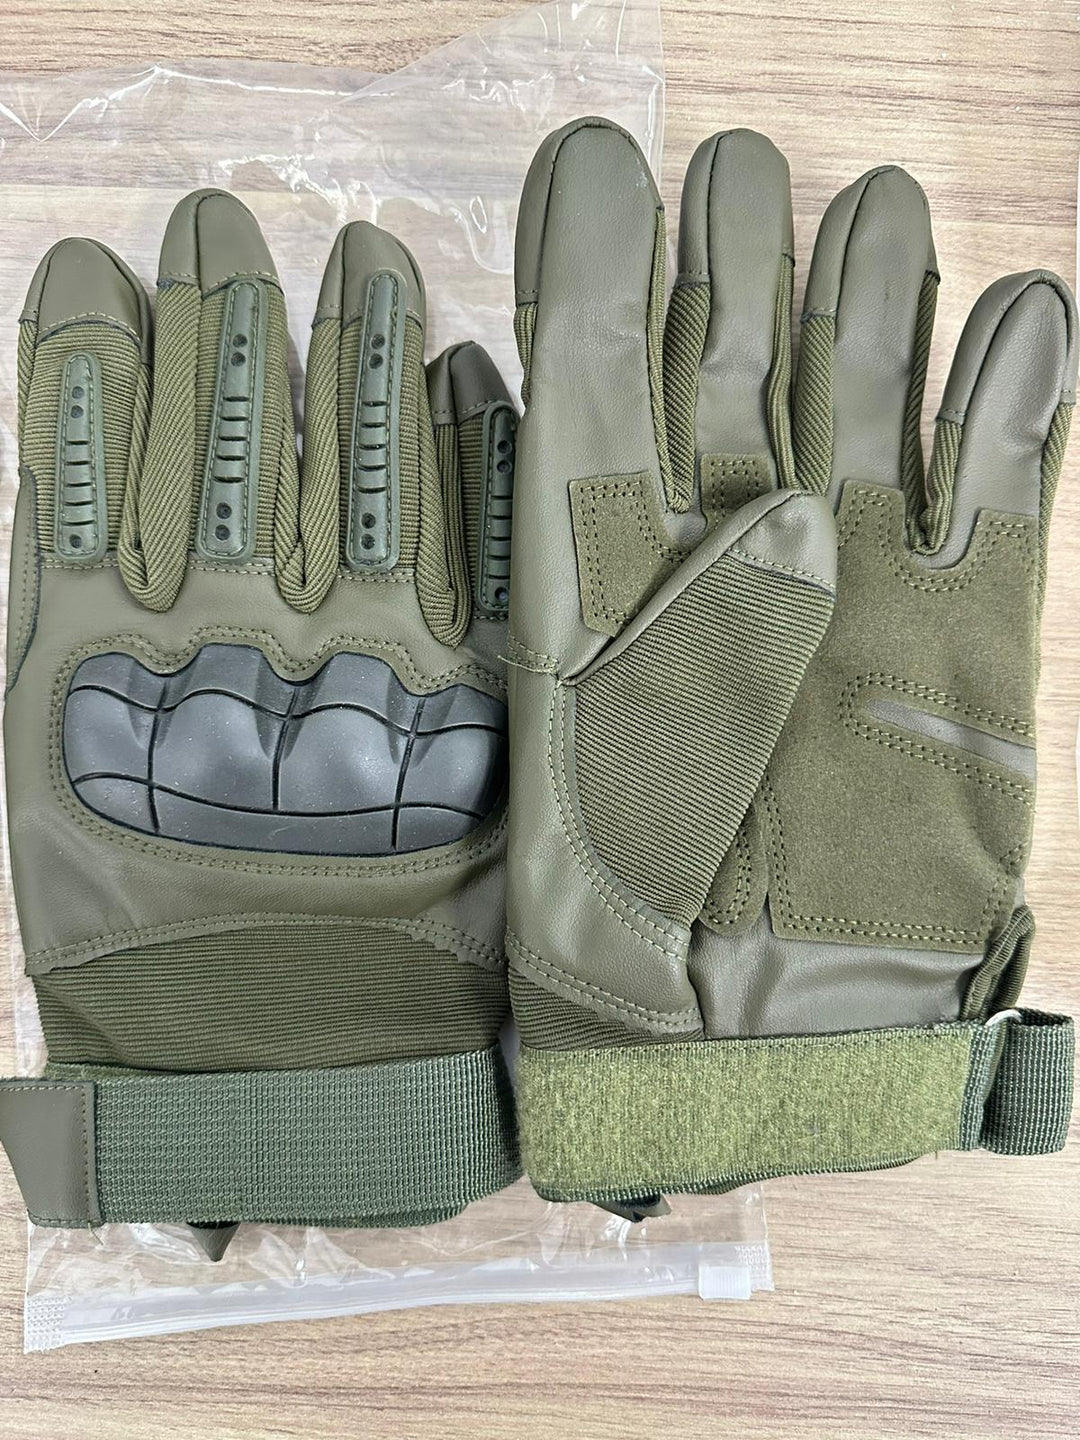 Michael's Tactical Gloves